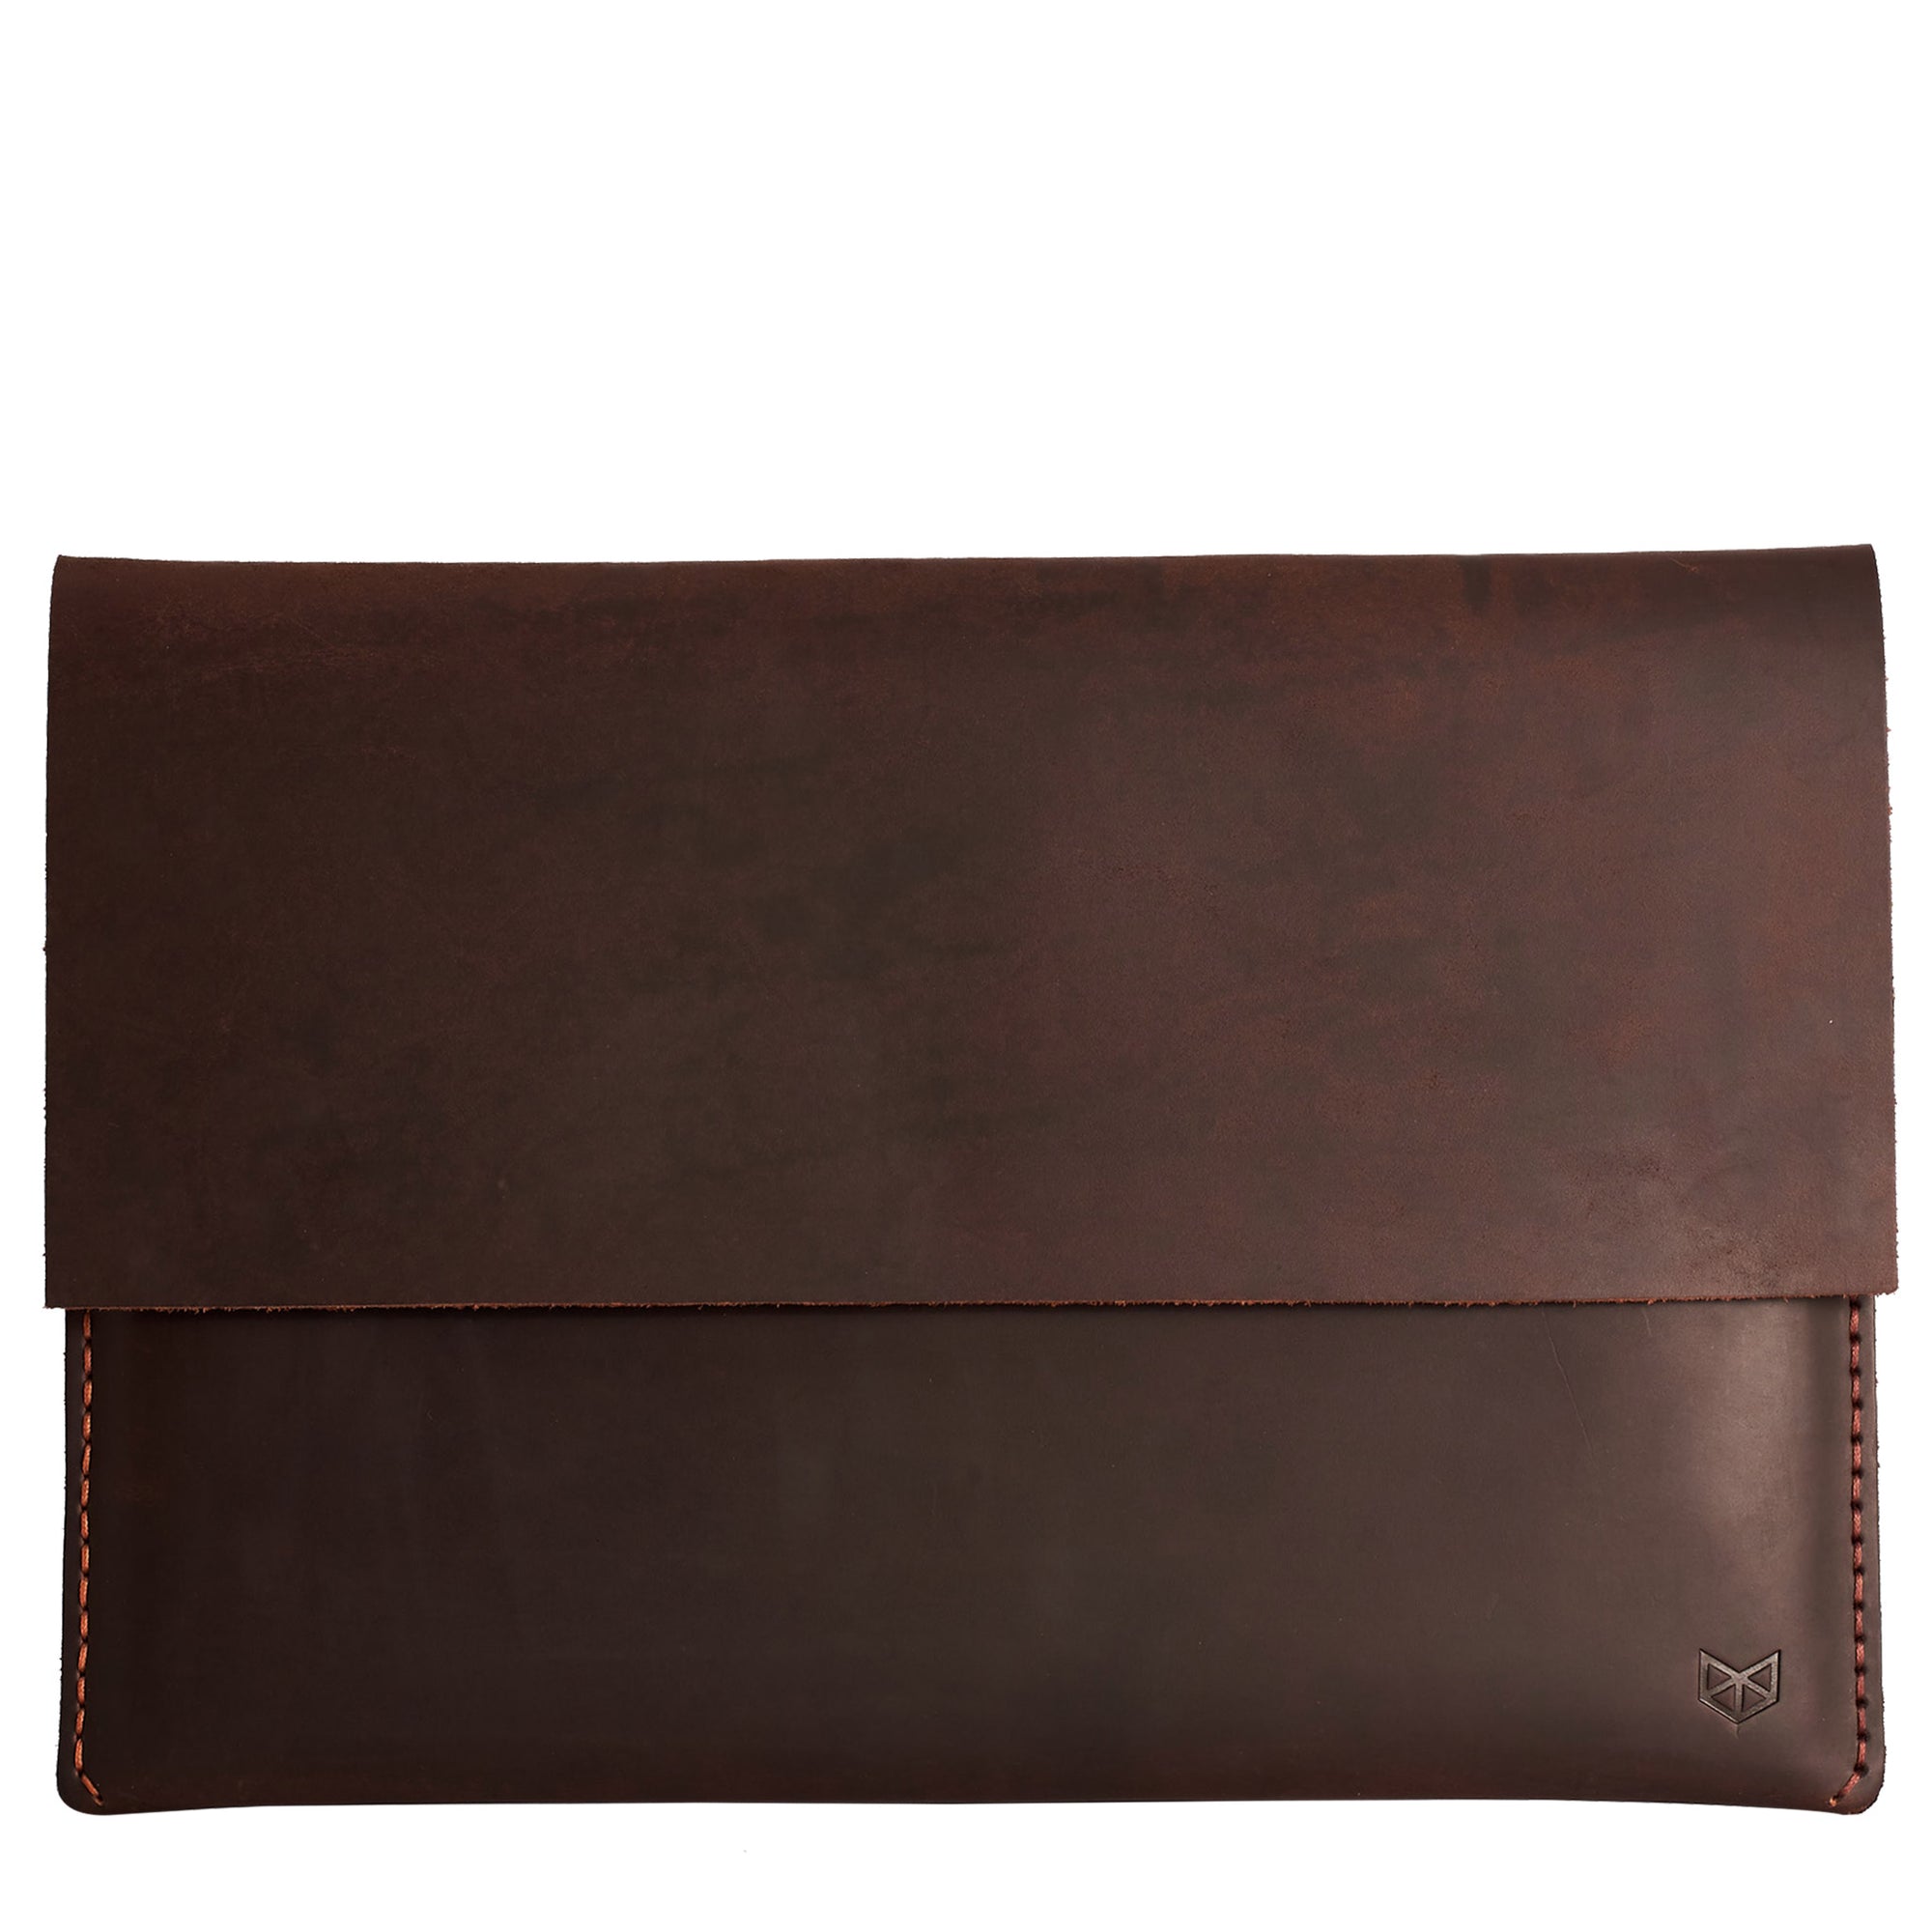 Closed. Brown Leather MacBook Case. MacBook Sleeve by Capra Leather